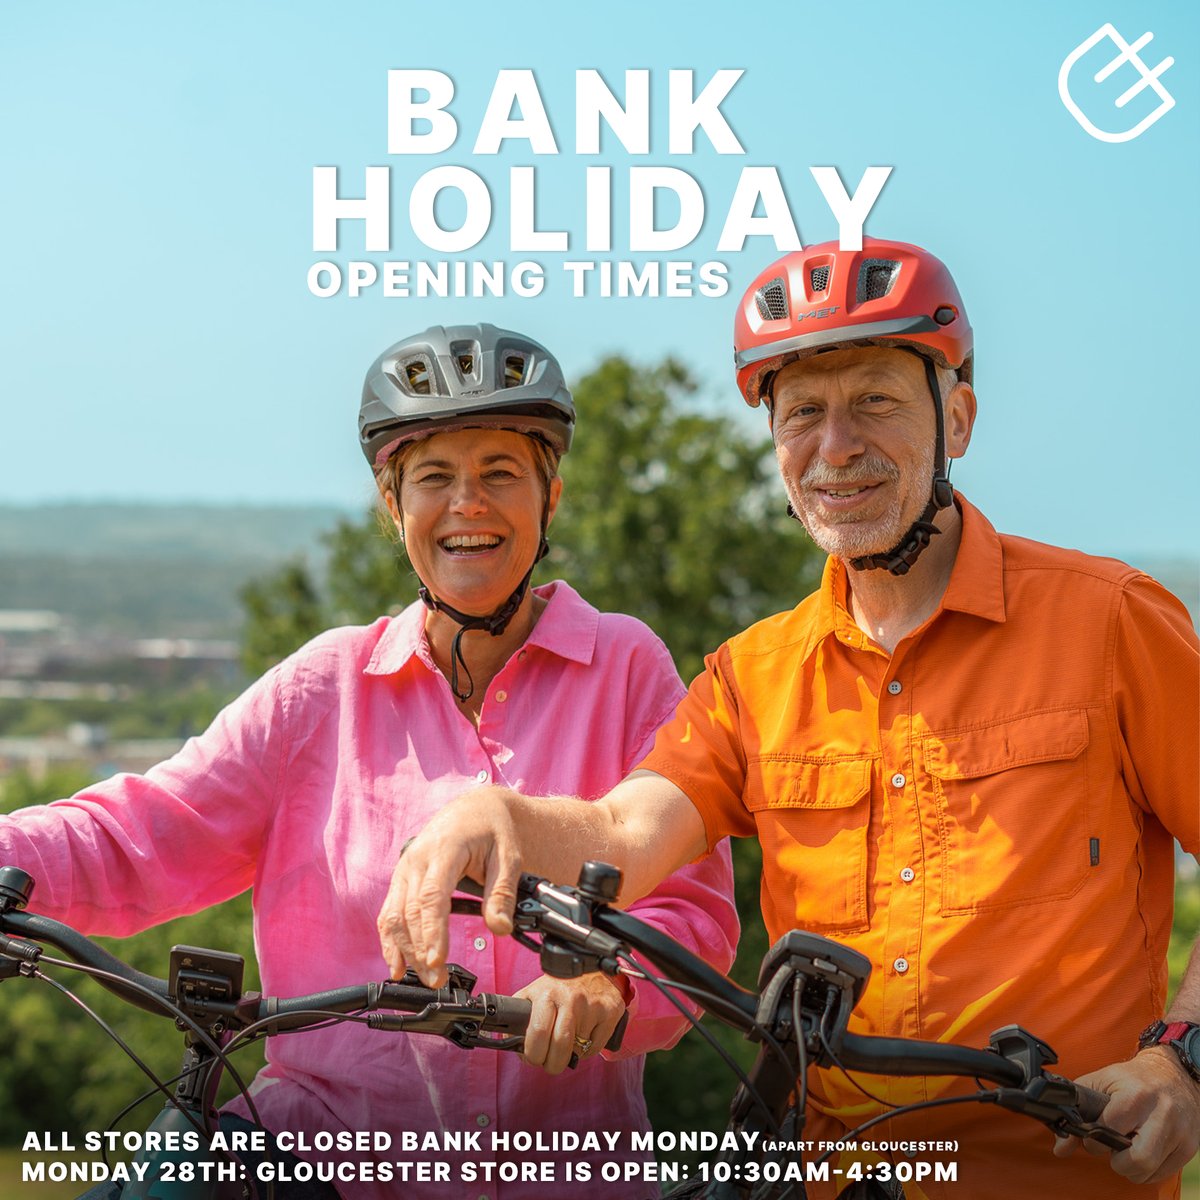 Celebrate the Bank Holiday with an electrifying ride! 🚴‍♀️⚡ Store Opening Times: Please note that all stores will be closed on Monday, except for our Gloucester store, which will be open from 10:30am - 4:30pm. #openingtimes #bankholiday #ebike #bikes #cycling #cyclinguk #tebs